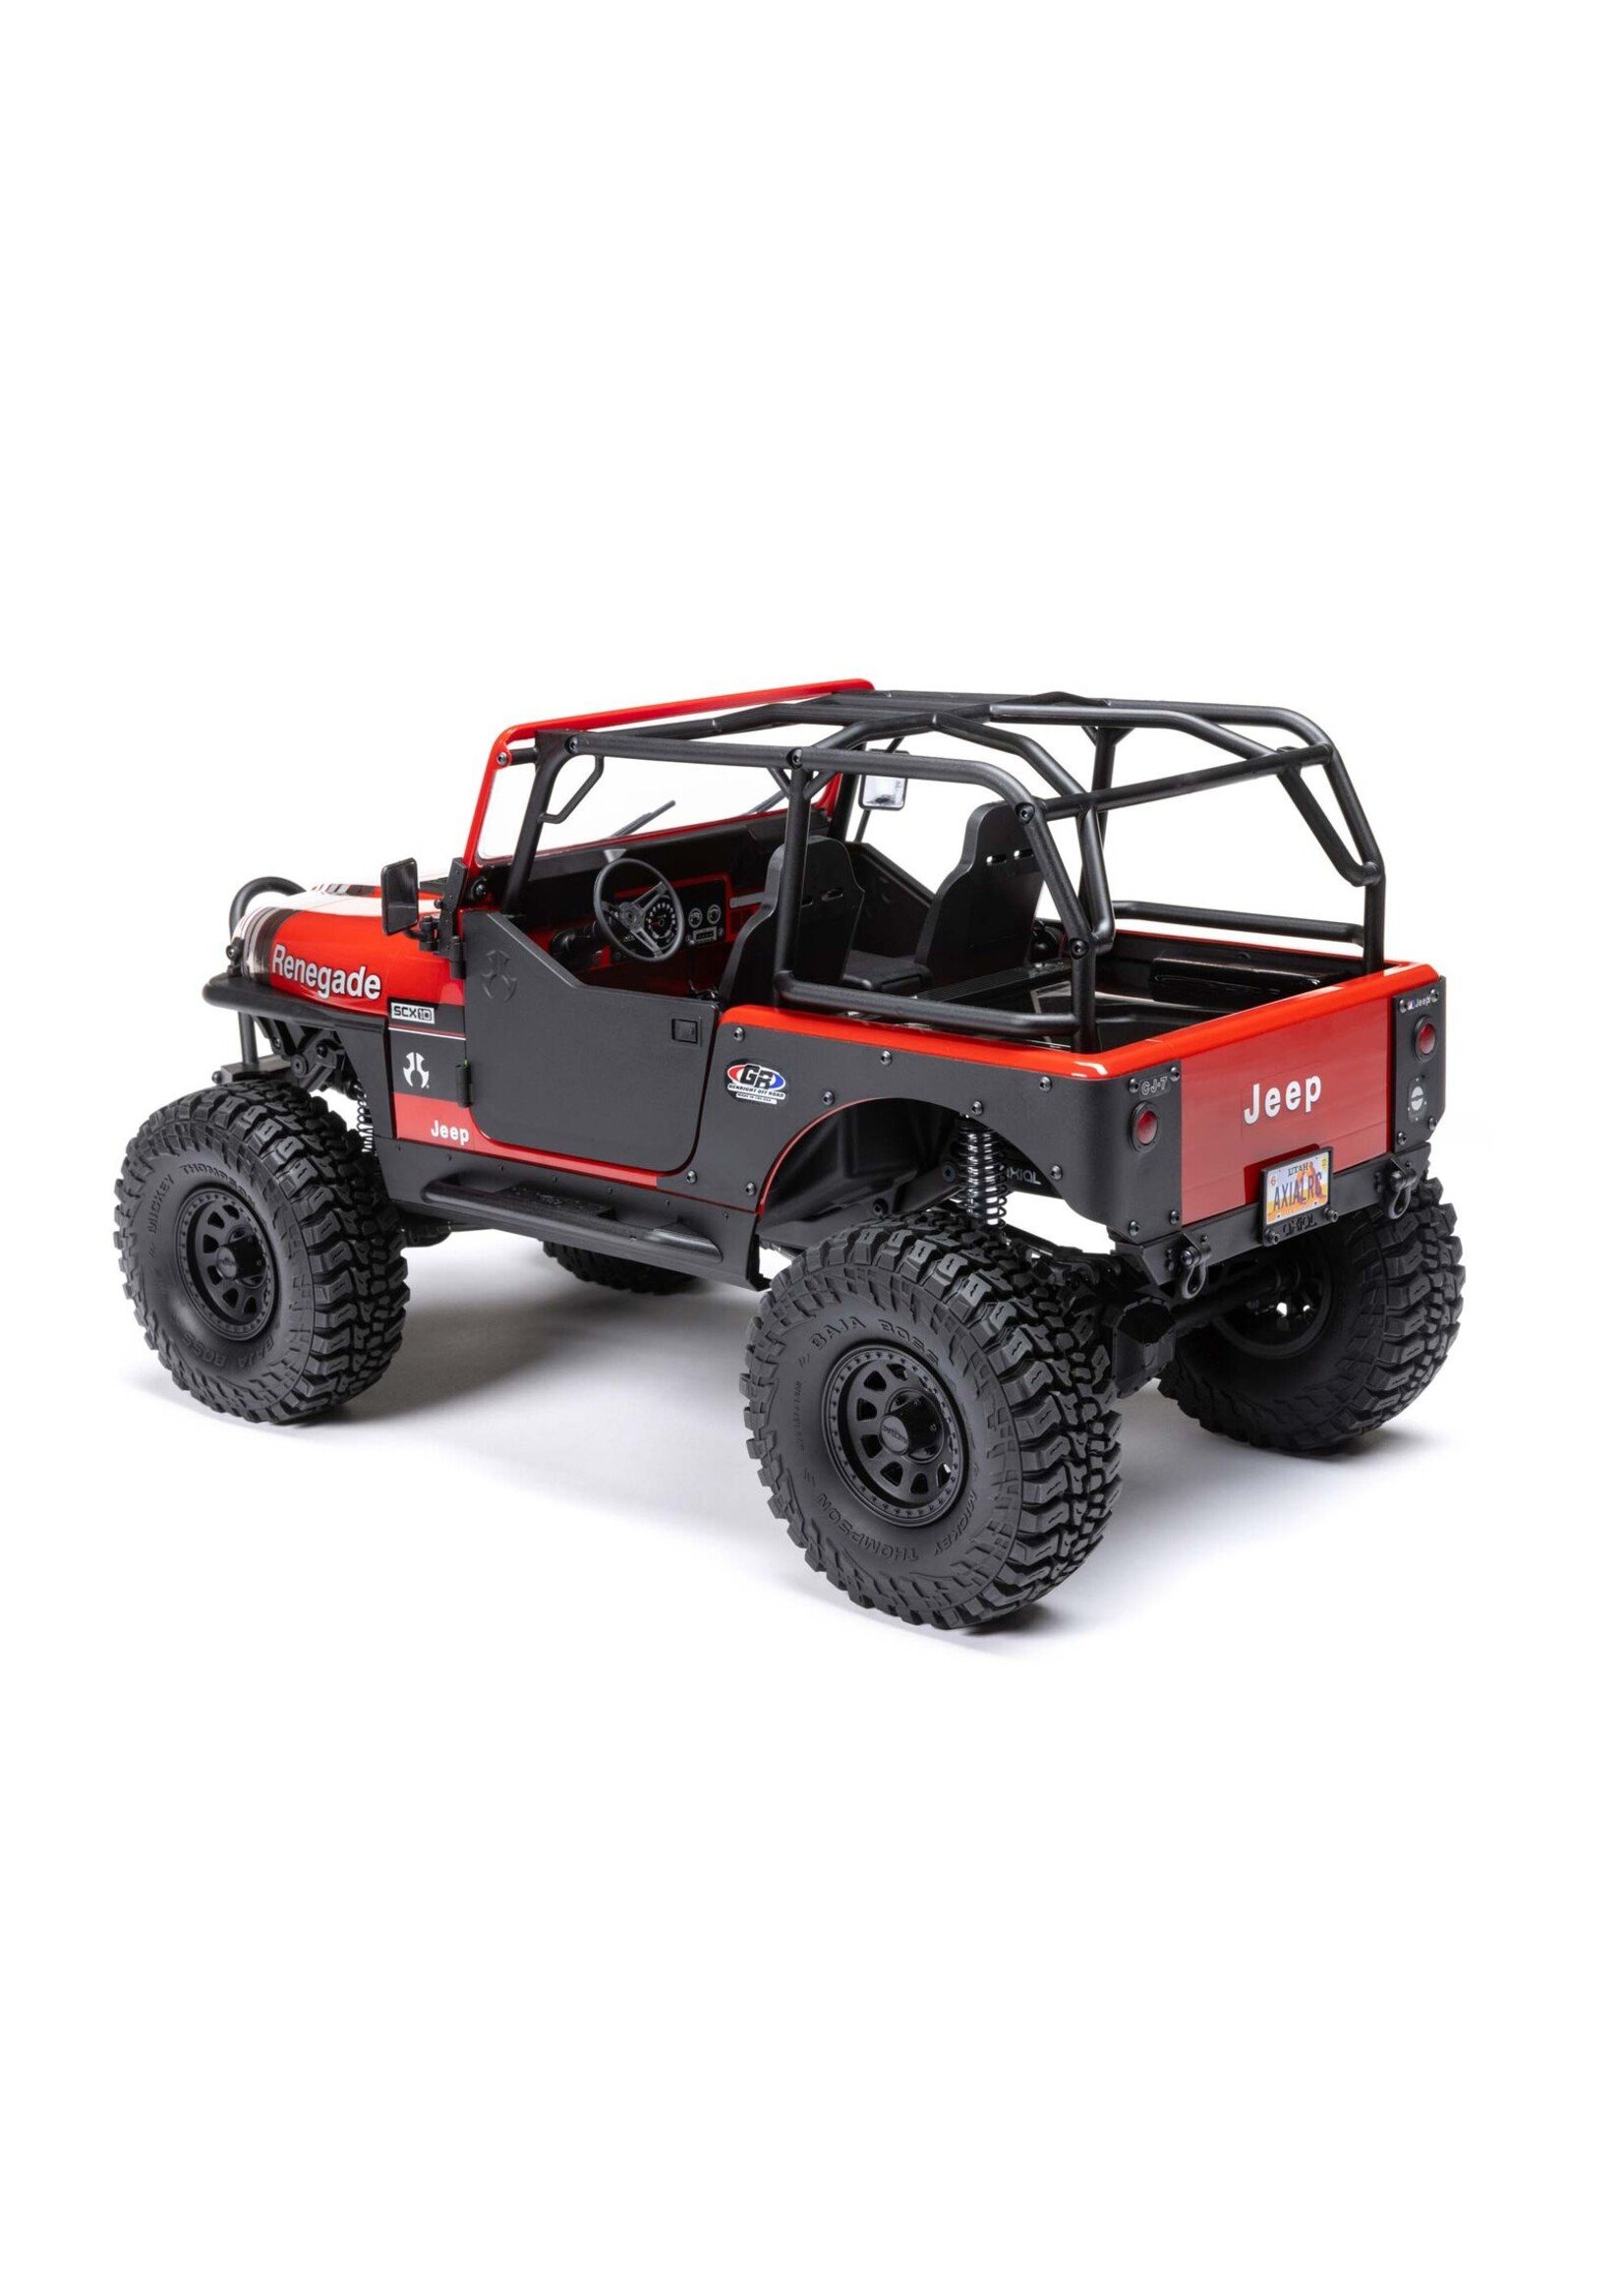 Axial AXI 03008T1 - SCX10 III Jeep CJ-7 Brushed, RTR - Red